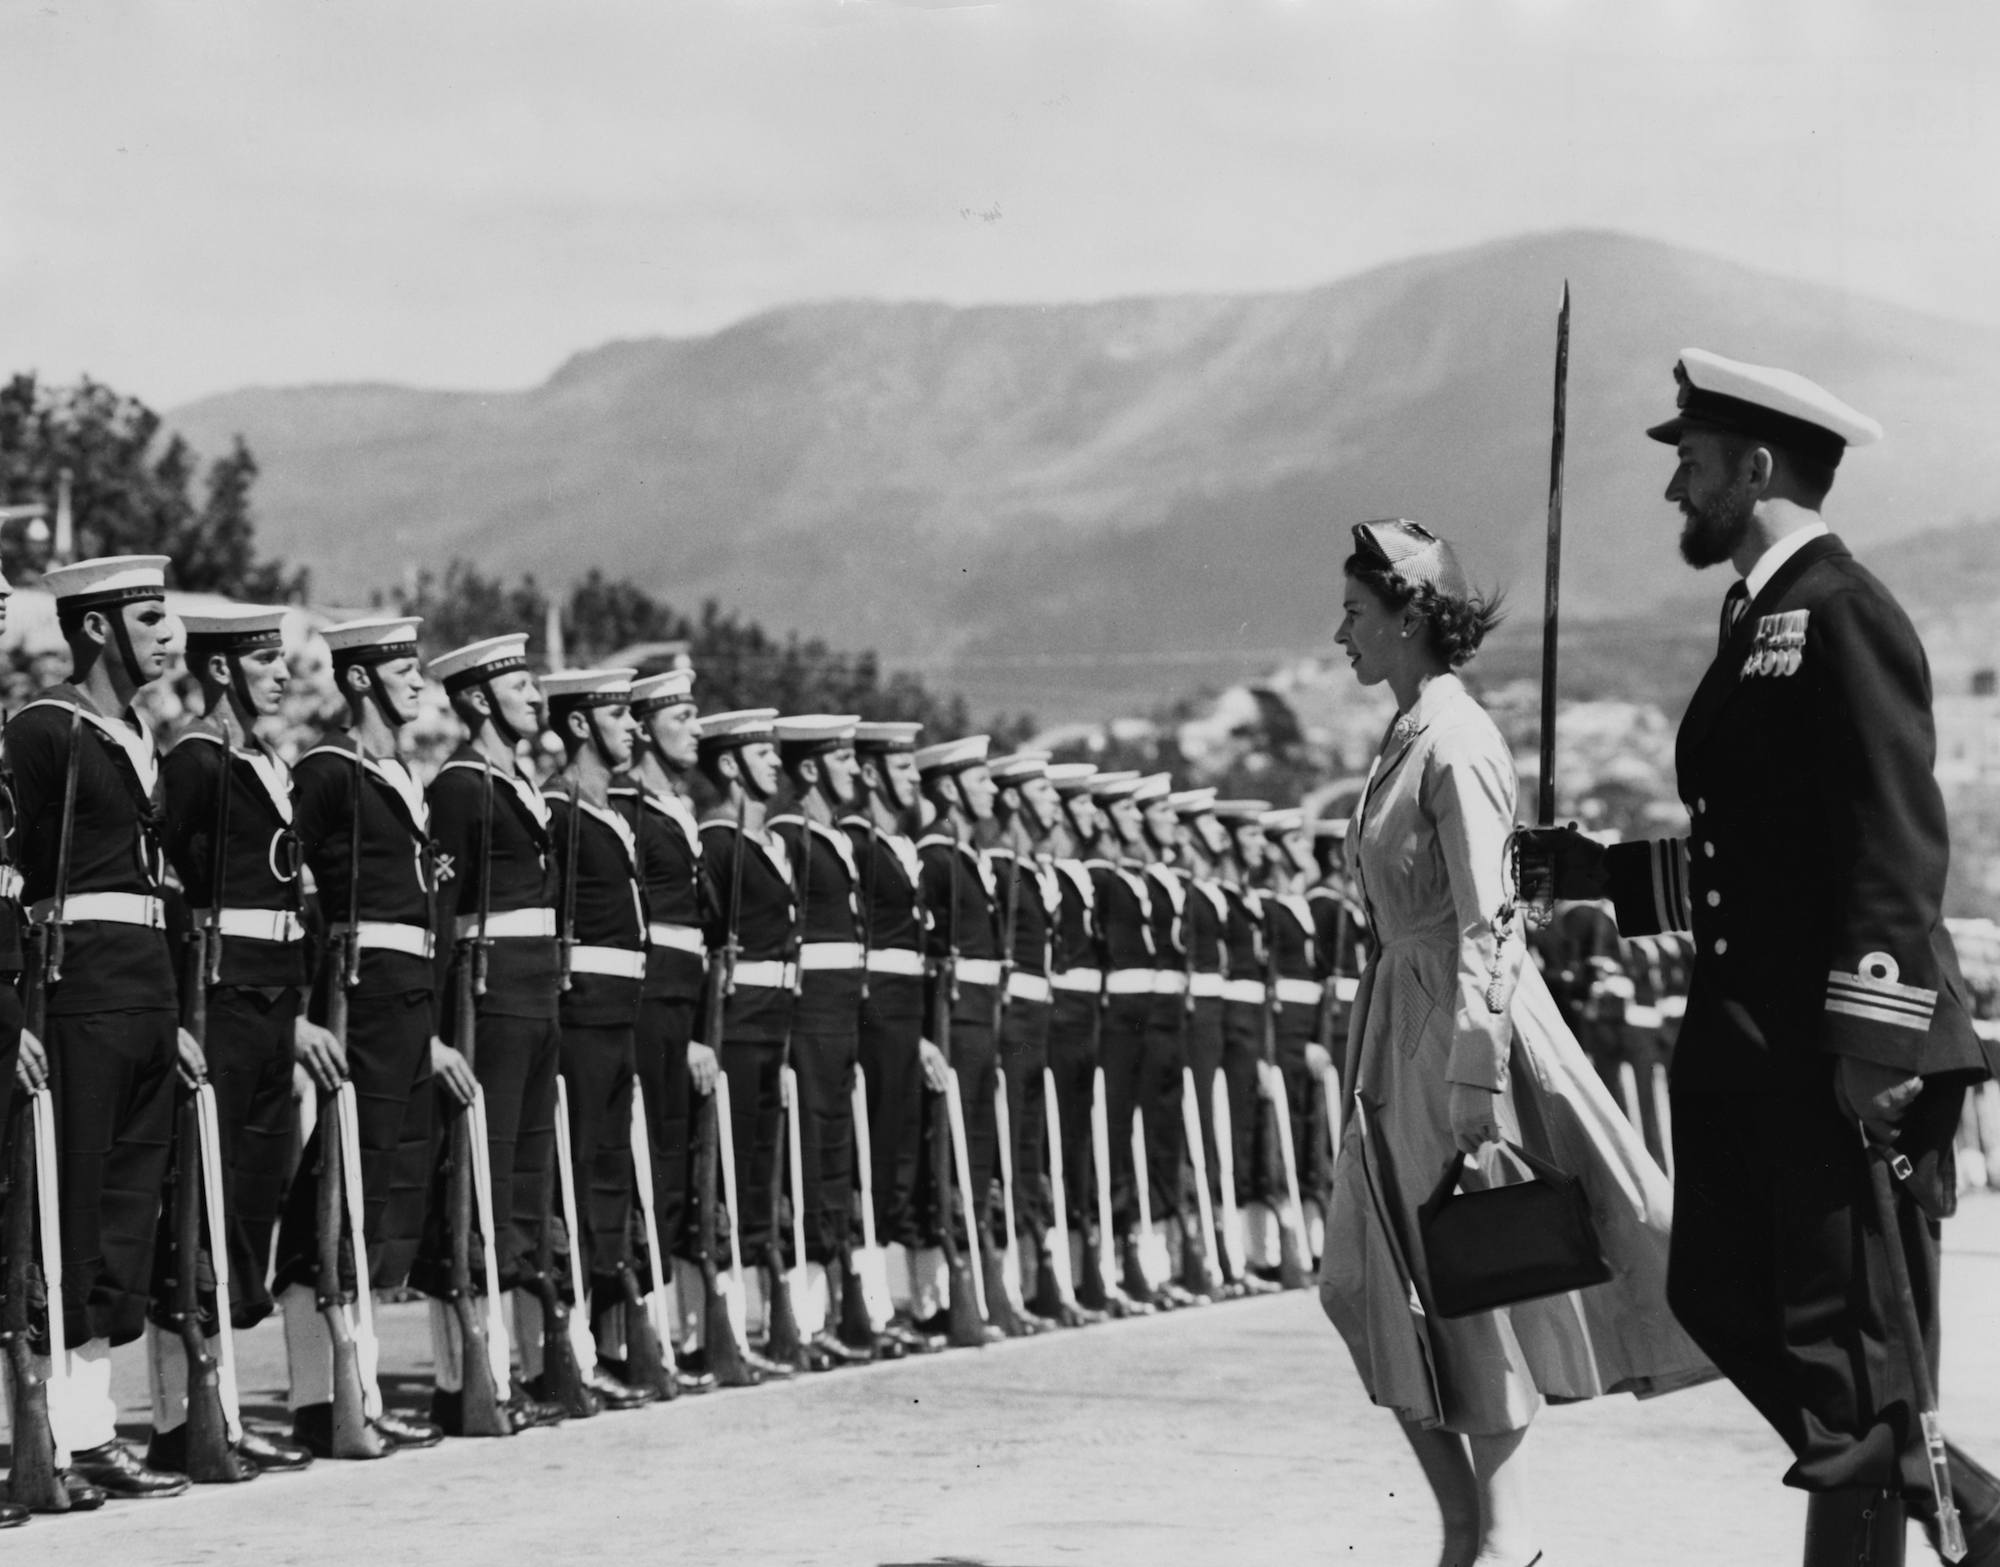 Queen Elizabeth II and the Guard Commander inspect a Guard of Honor at Prince's Wharf, Hobart